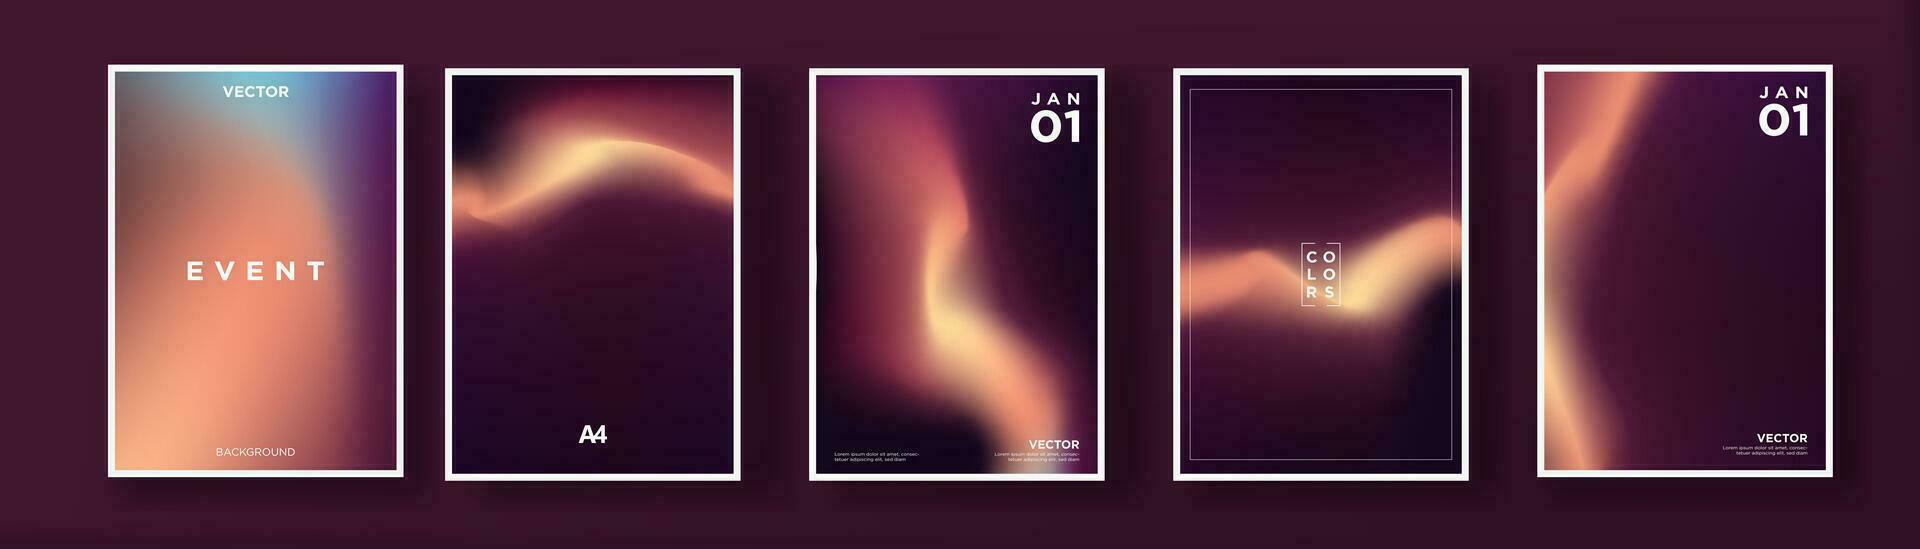 Beautiful subtle cover art designs with bright and dark gradient designs. Decorative minimalist gradient art. Applicable to prints, banners, landing pages, web, templates, background. EPS 10. vector